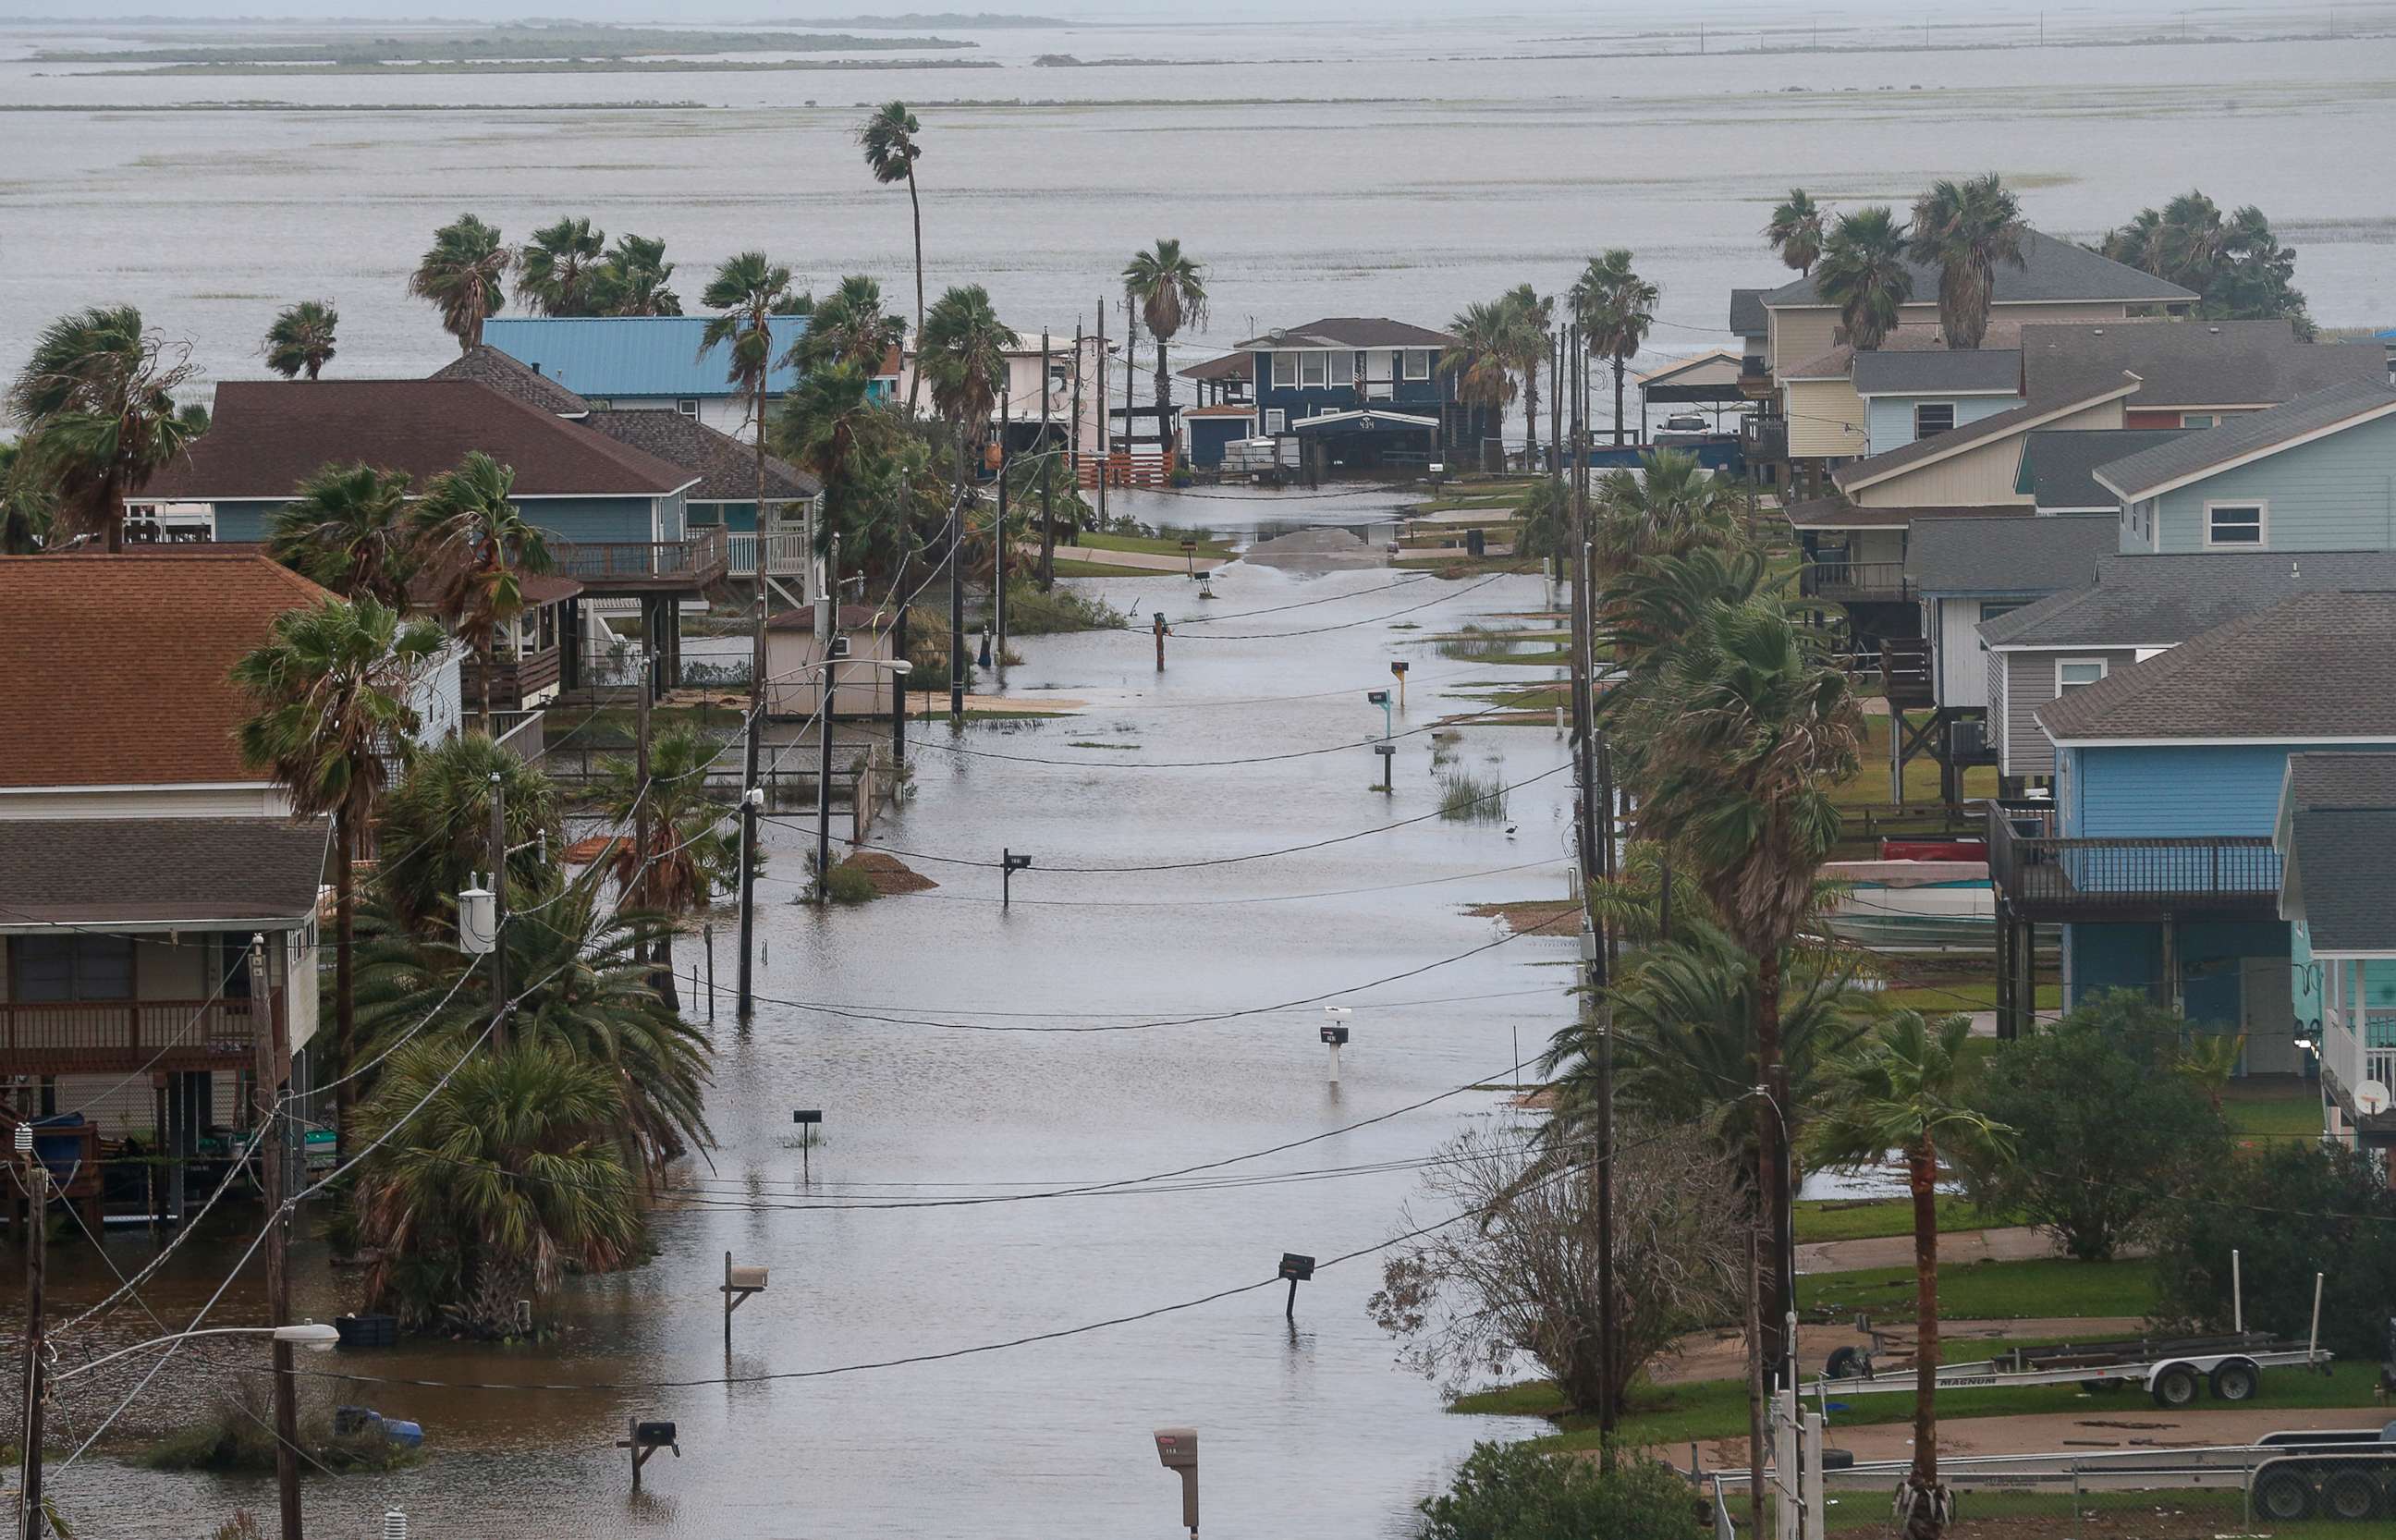 PHOTO: Some roads remain flooded in Surfside Beach, Texas, after tropical depression Beta made landfall overnight, Sept. 22, 2020.